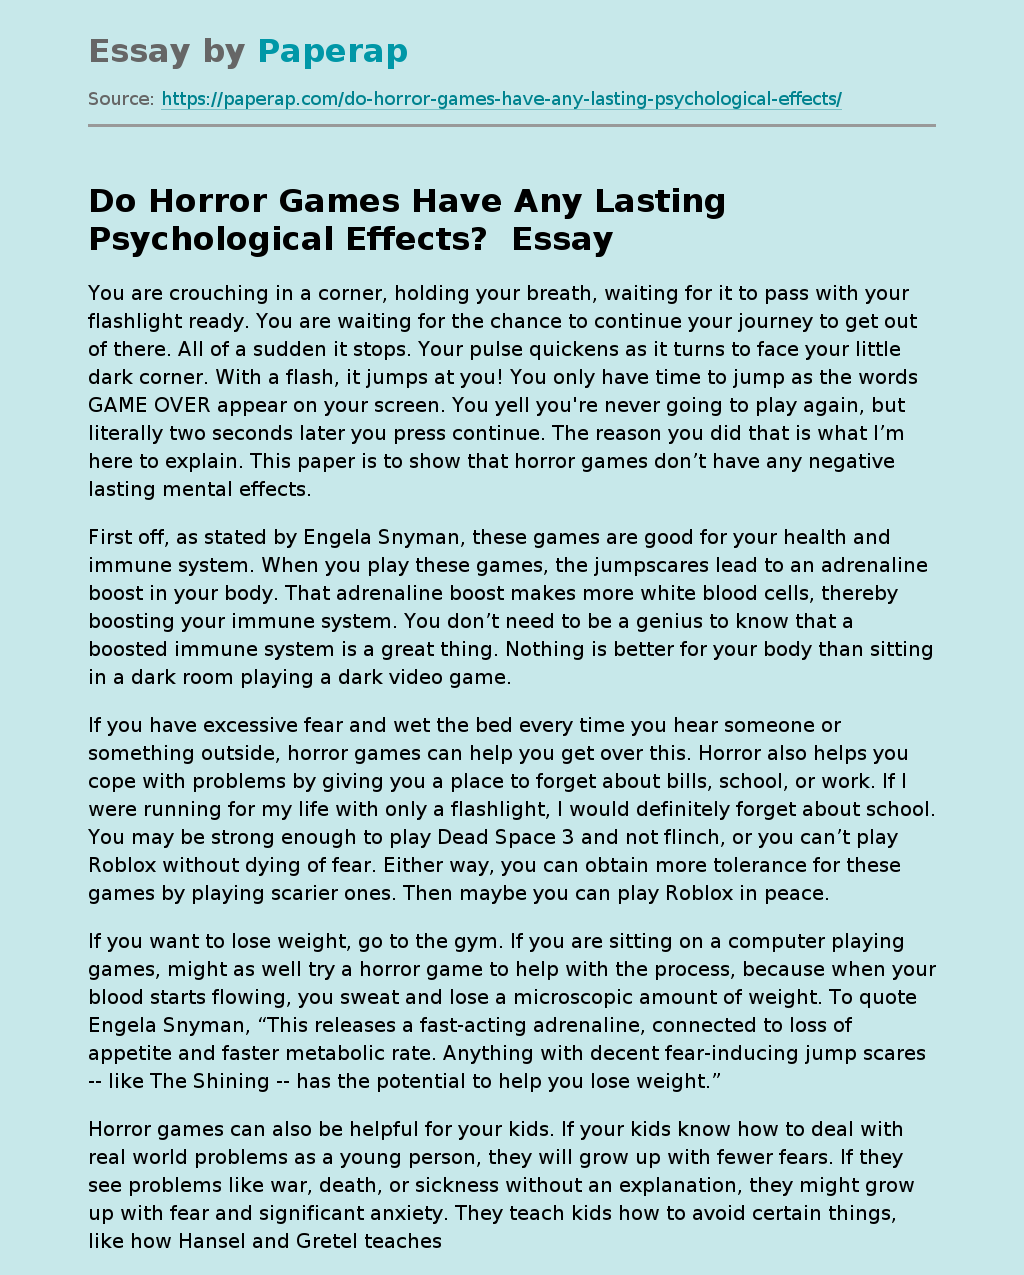 Do Horror Games Have Any Lasting Psychological Effects? 